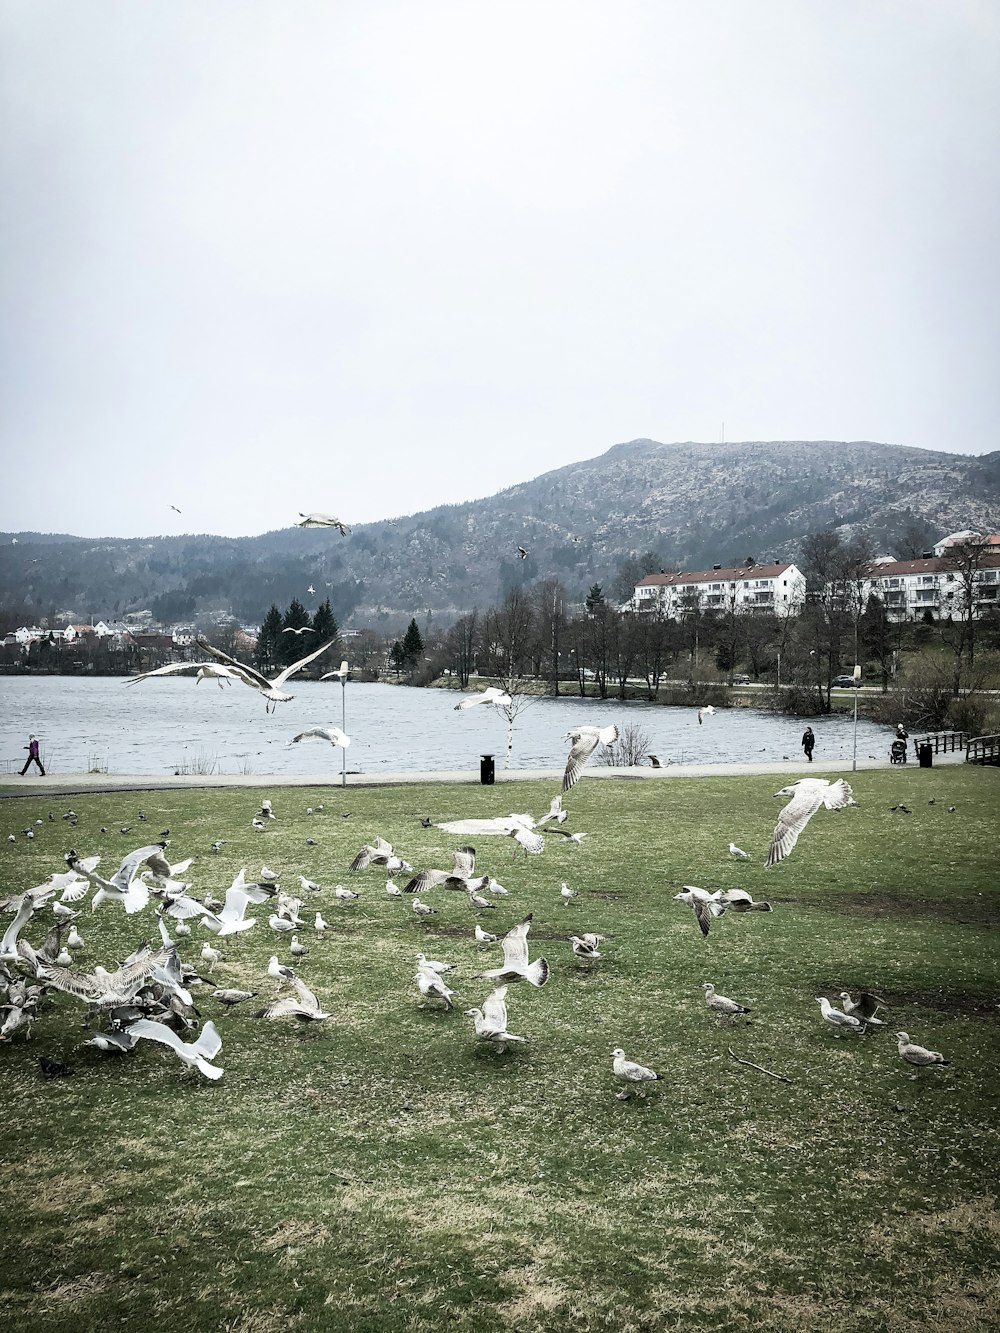 flock of white birds on green grass field near body of water during daytime